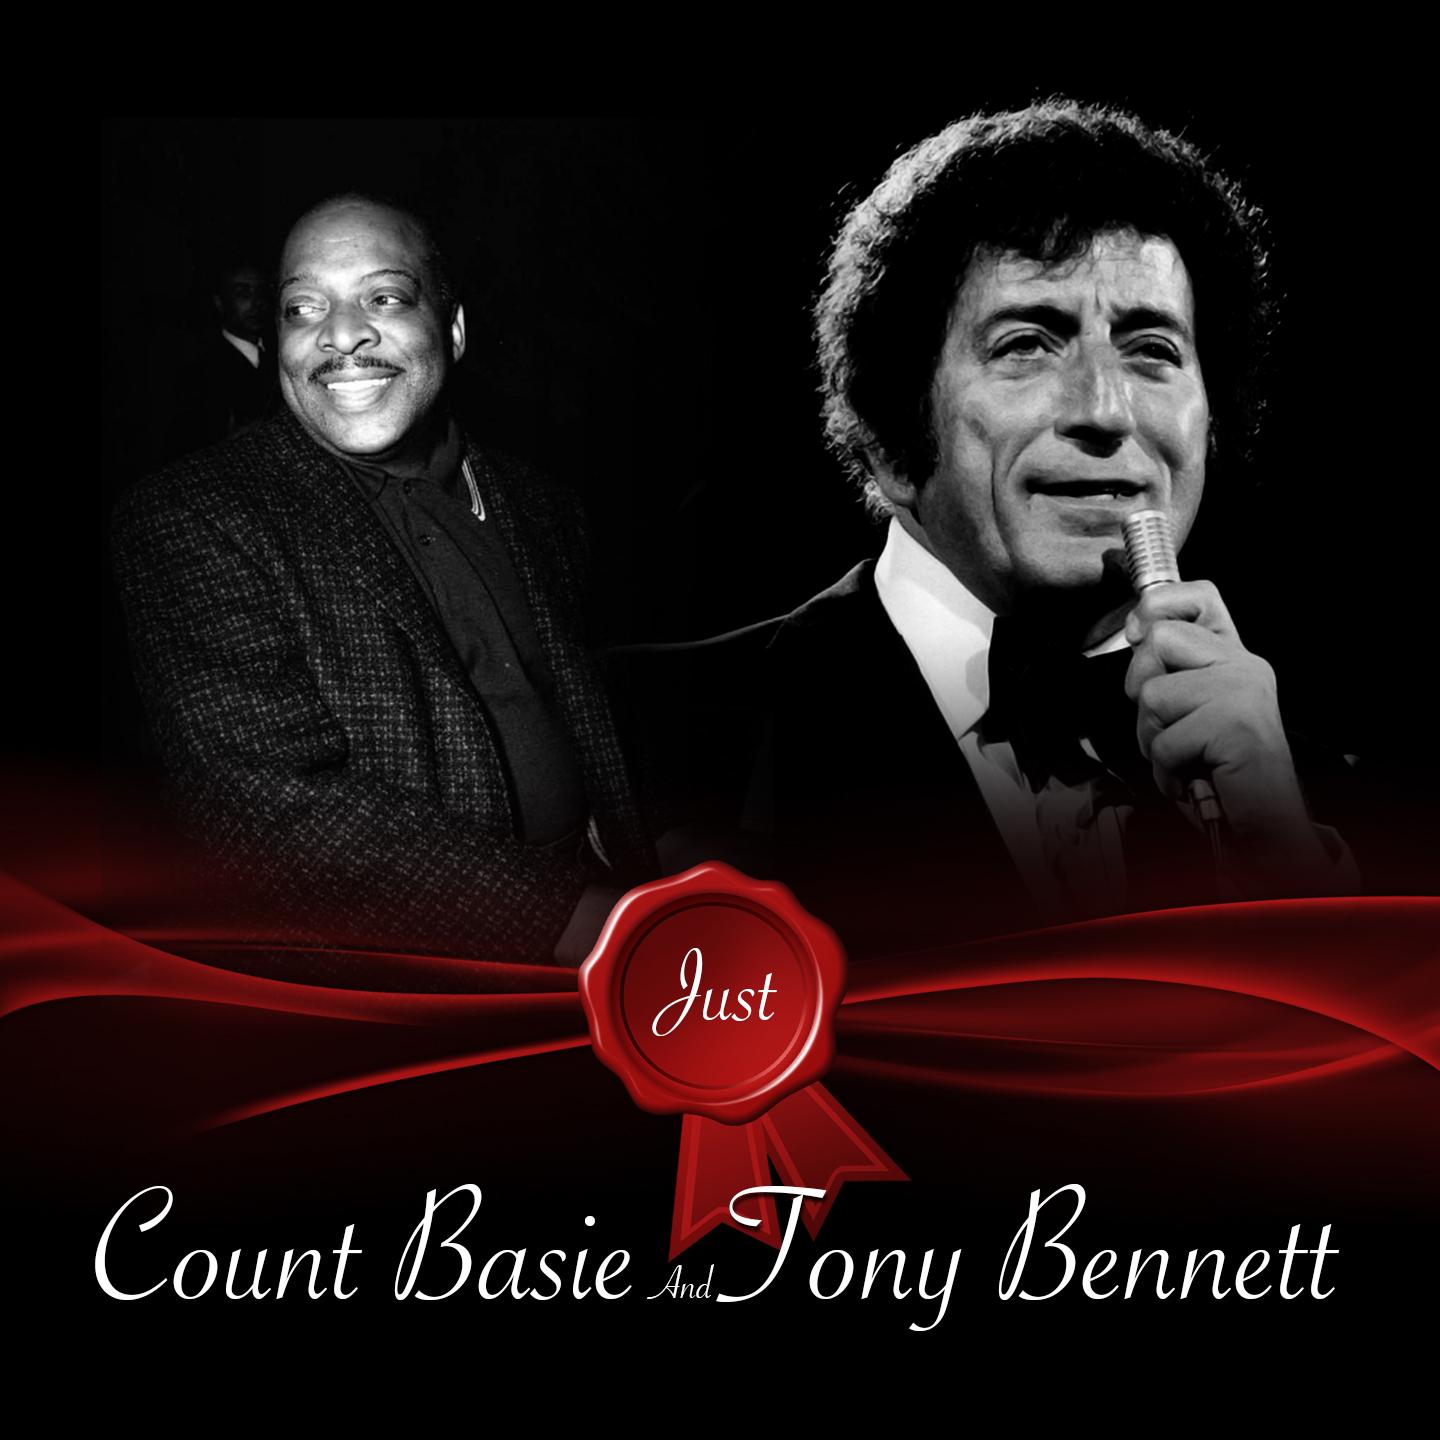 Just - Count Basie and Tony Bennett